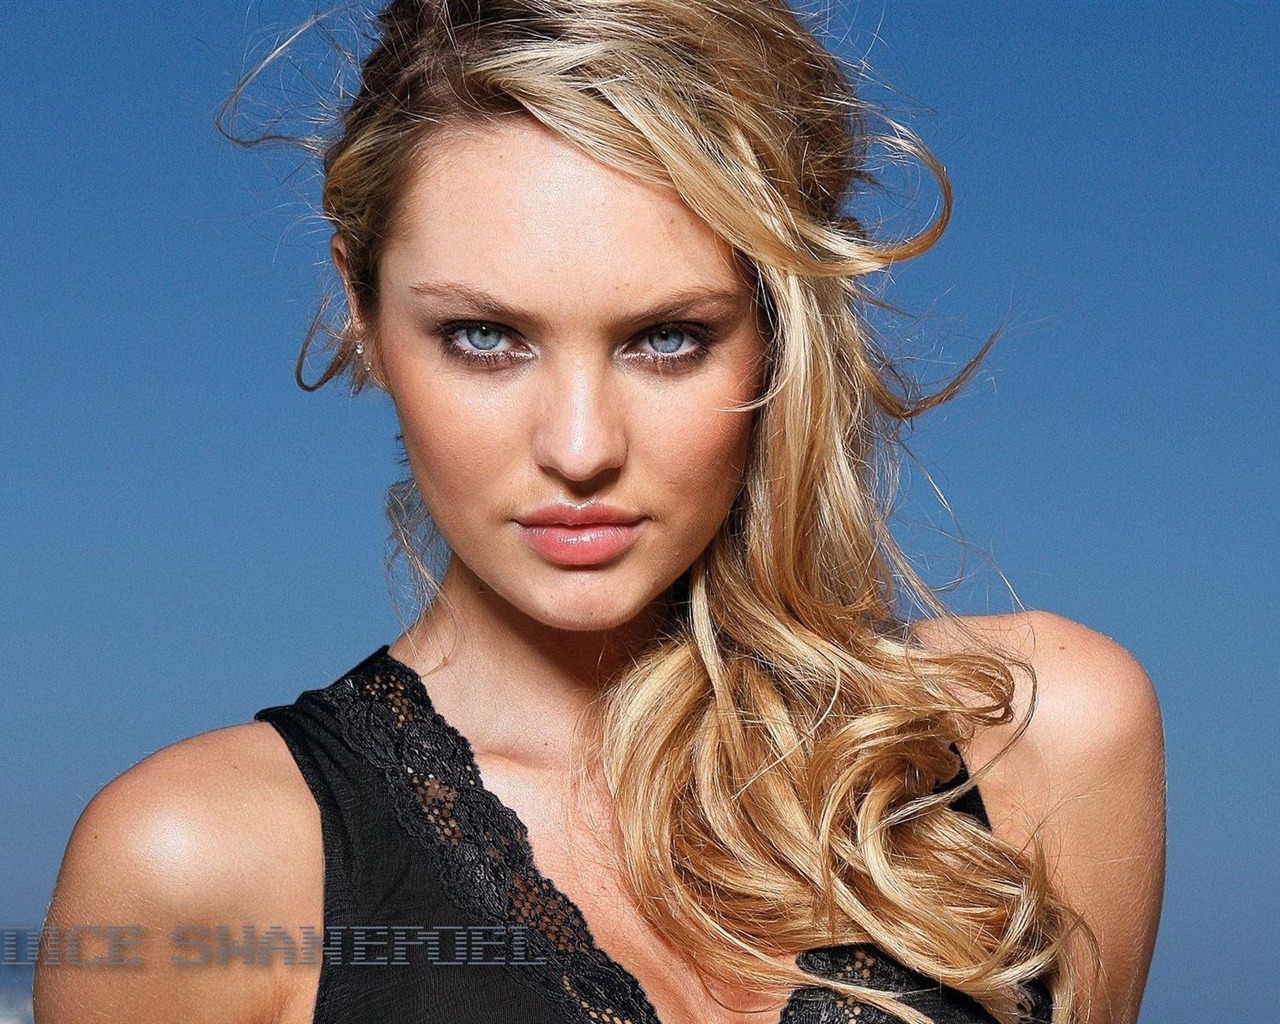 Candice Swanepoel #028 - 1280x1024 Wallpapers Pictures Photos Images